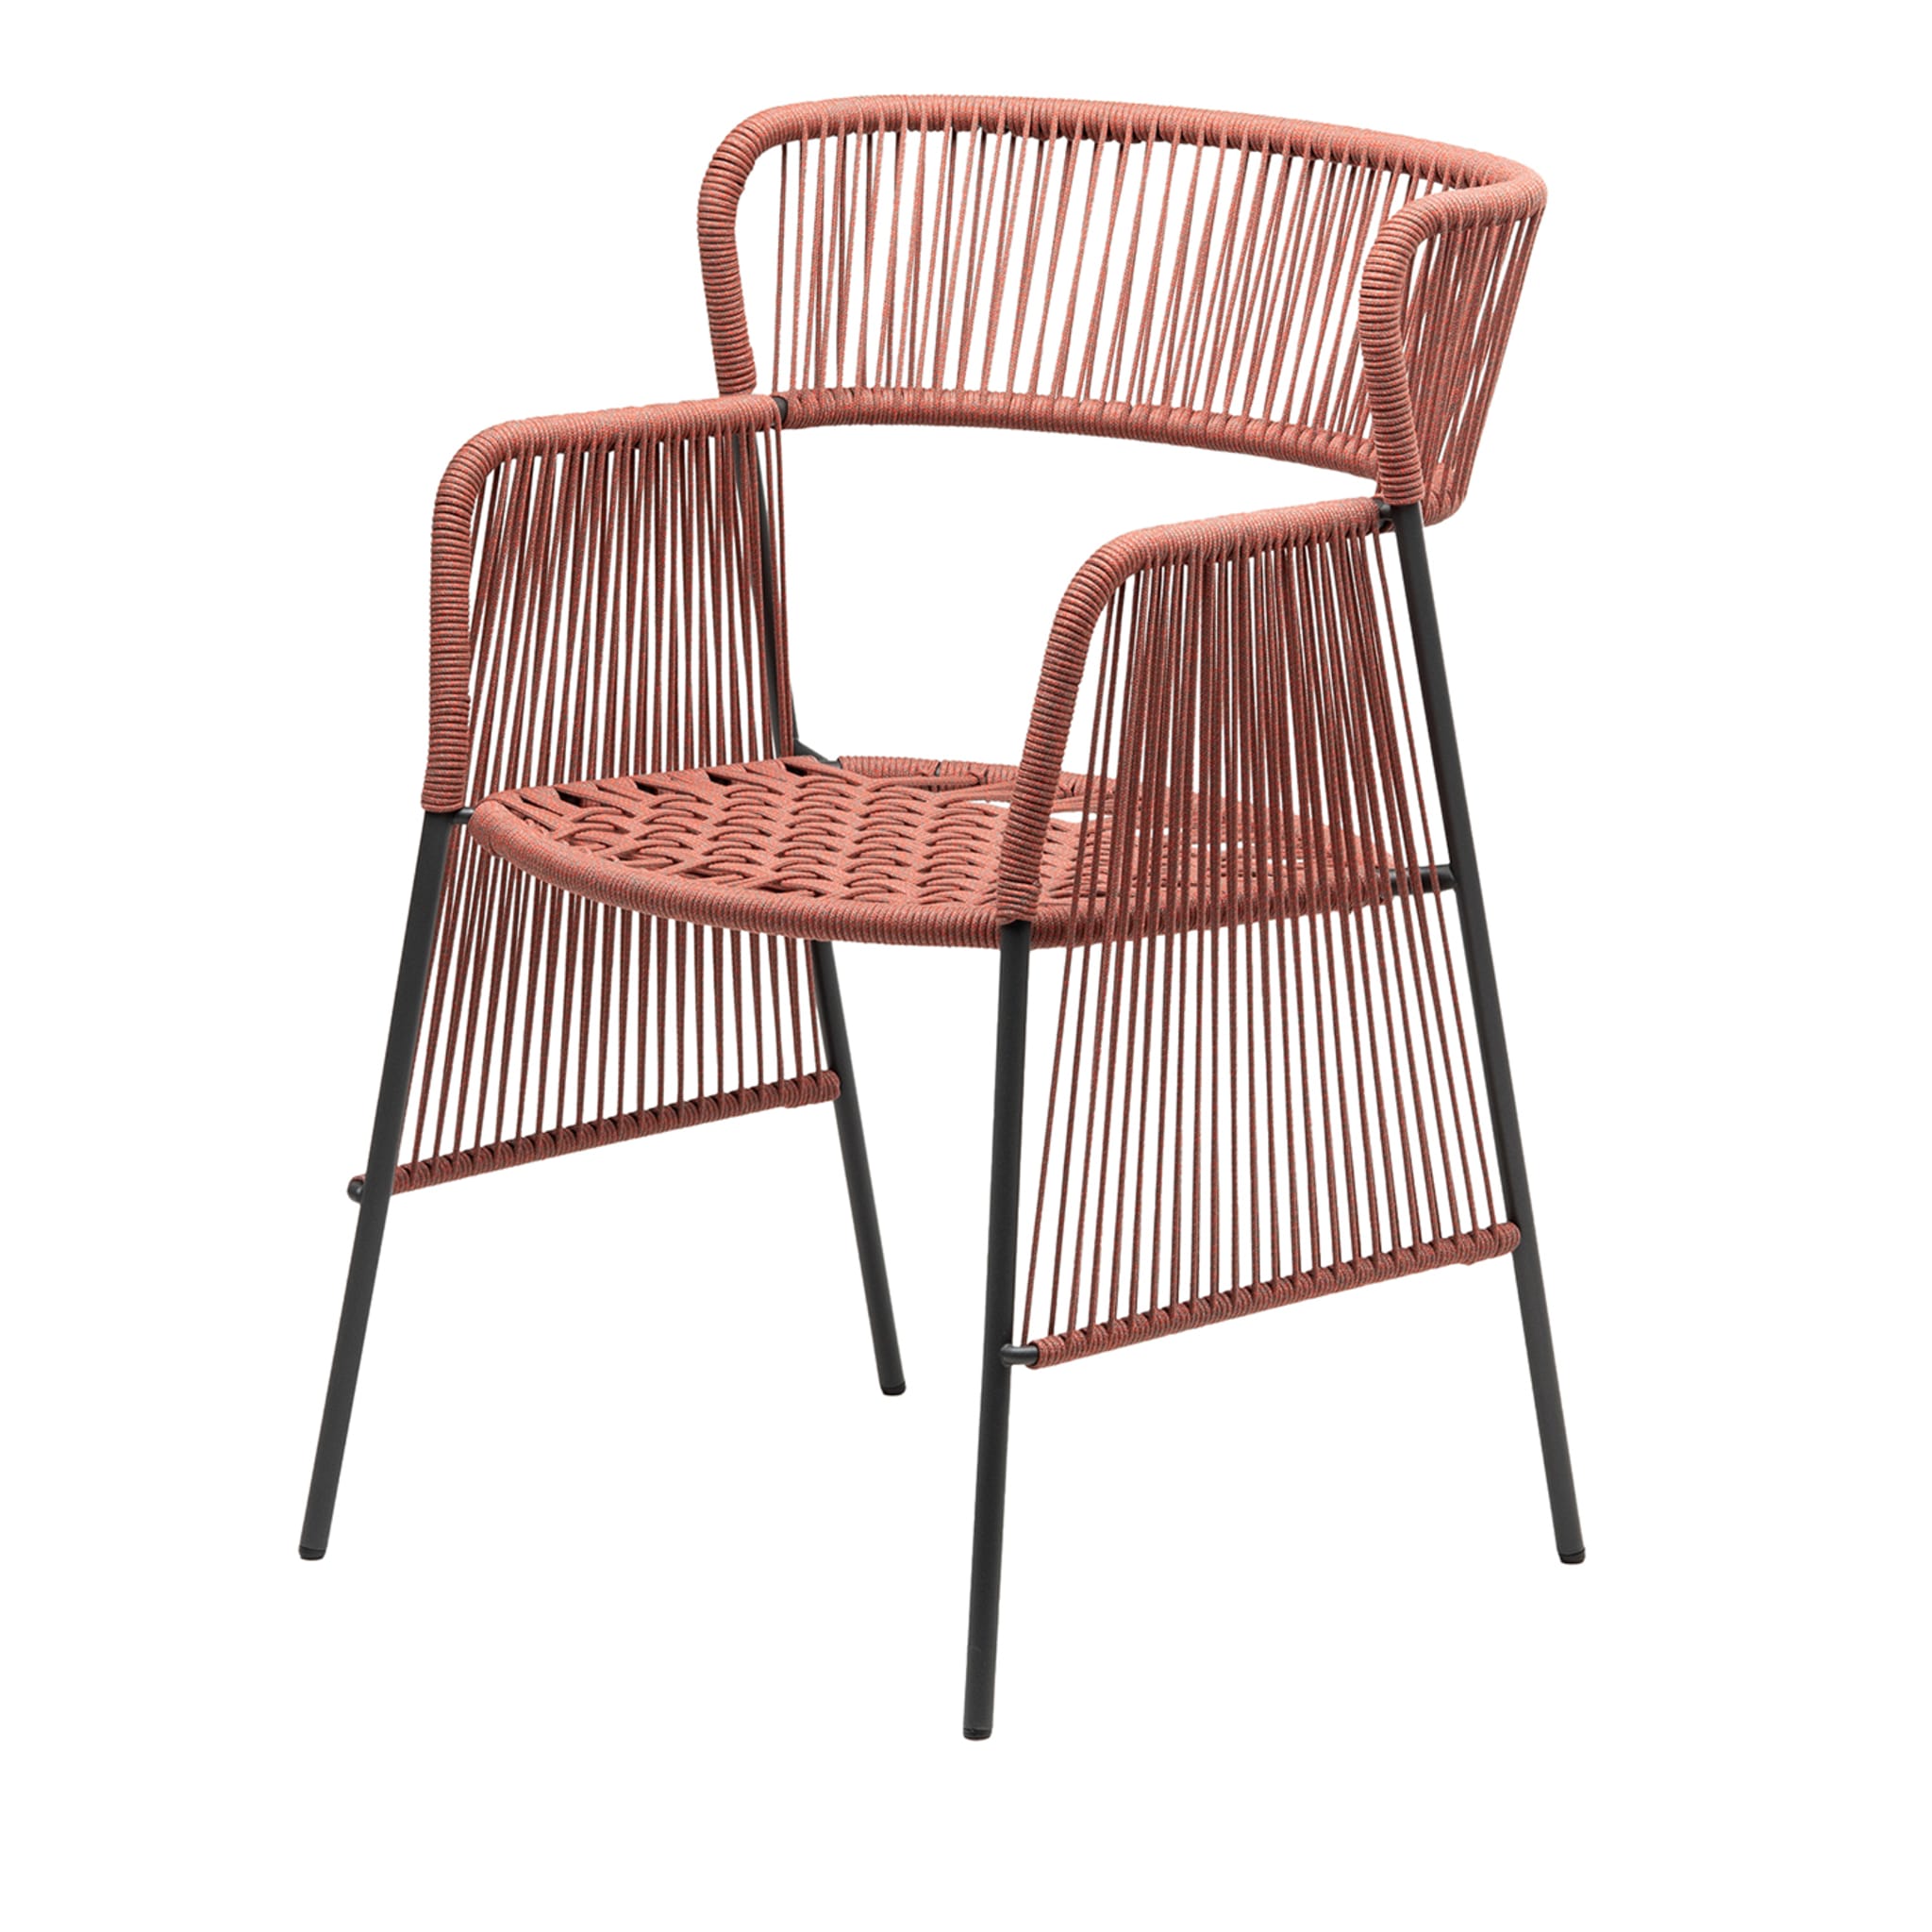 Altana SP Gray & Pink Chair by Antonio De Marco - Main view